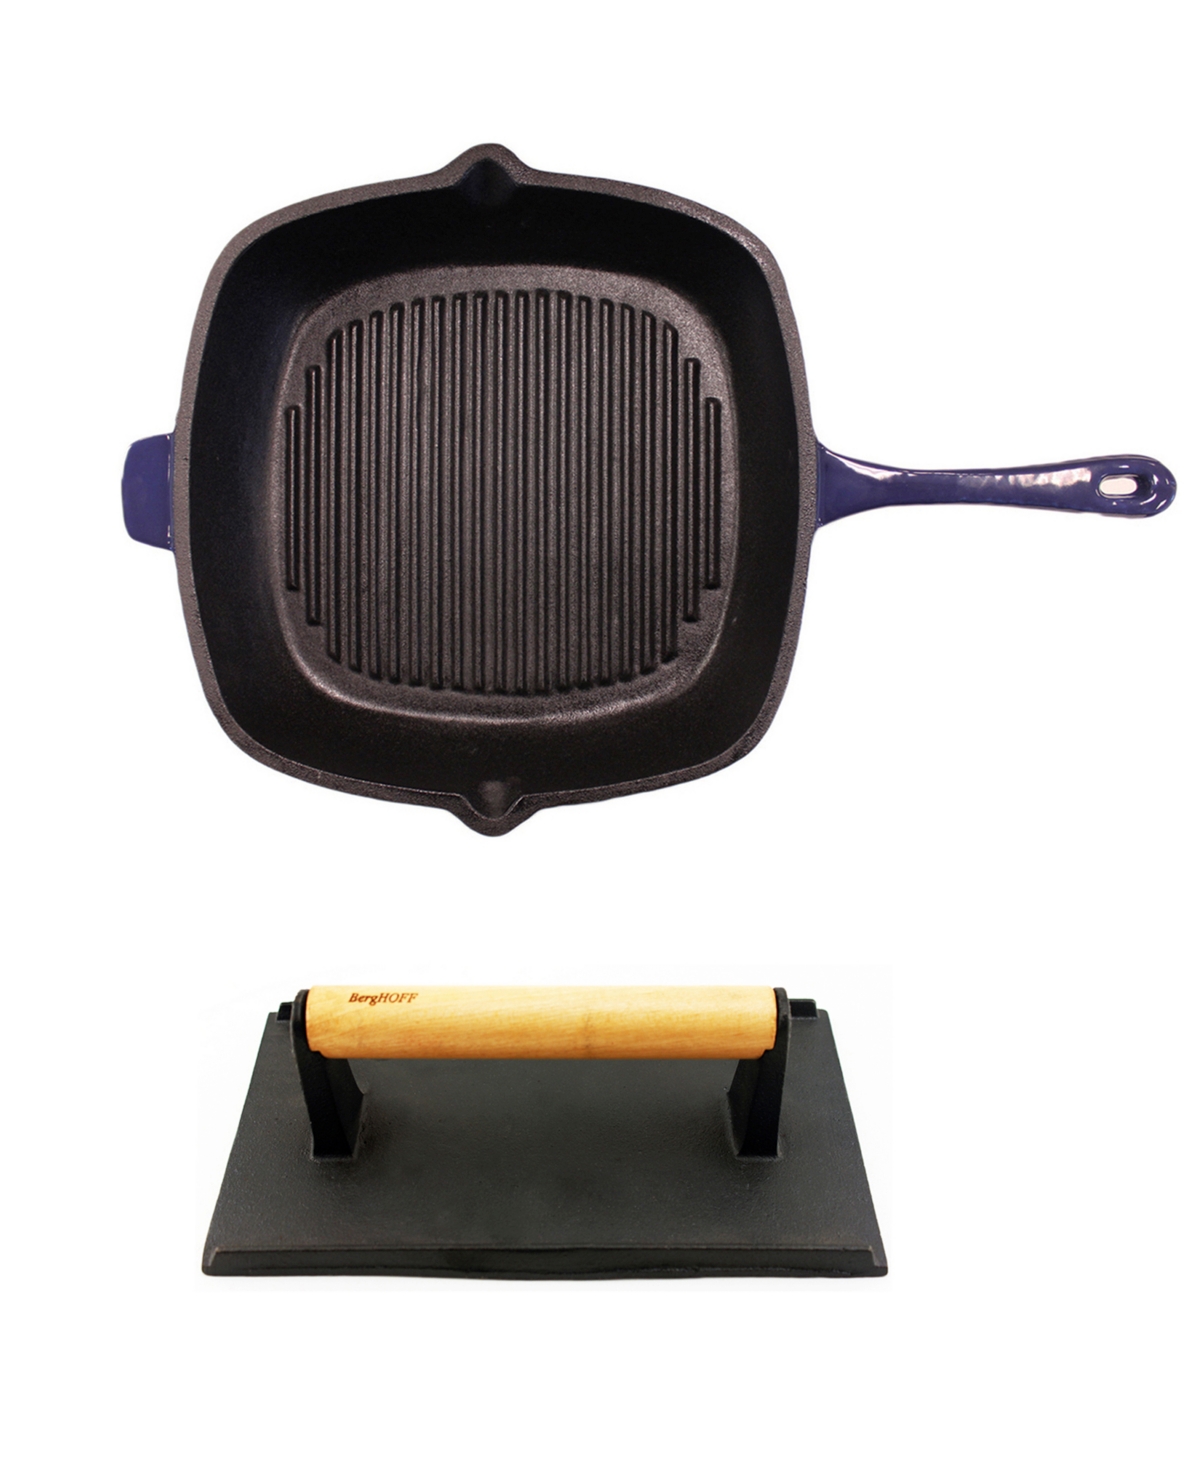 Berghoff Neo Cast Iron 11" Grill Pan And Press In Purple